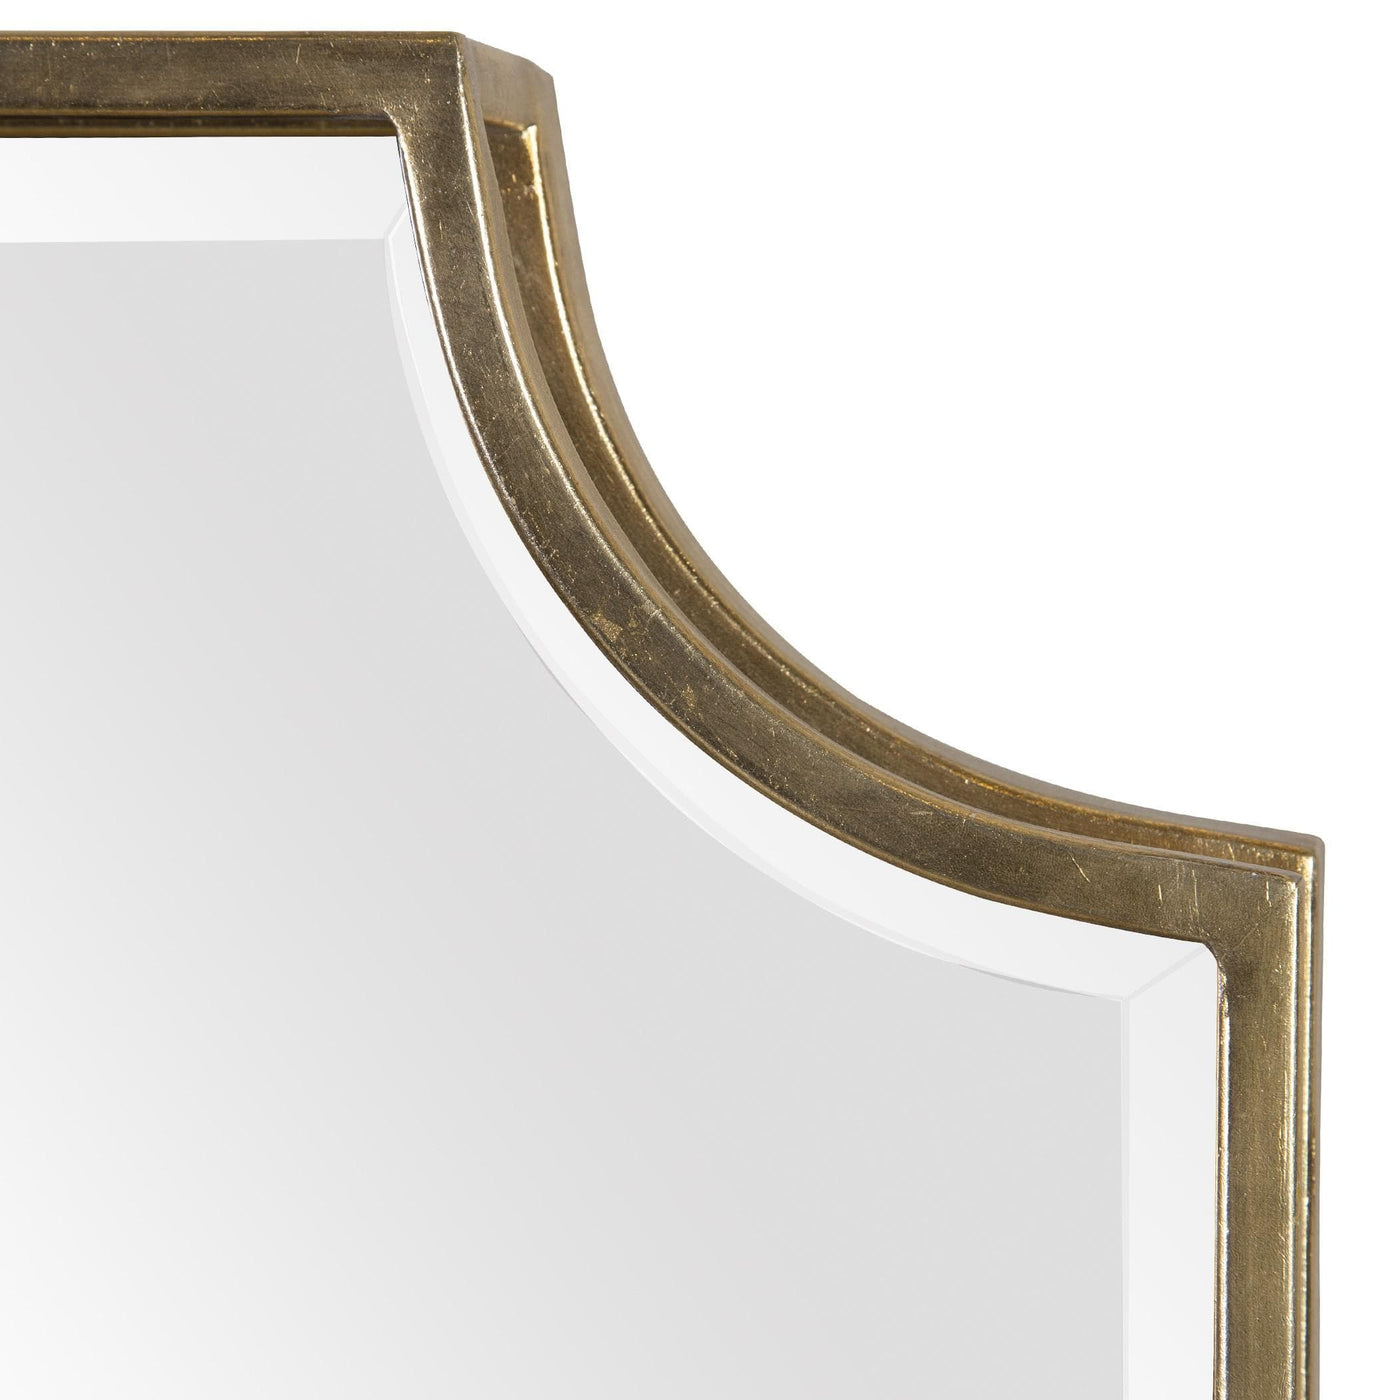 Uttermost Mirrors Lindee Gold Wall Mirror House of Isabella UK